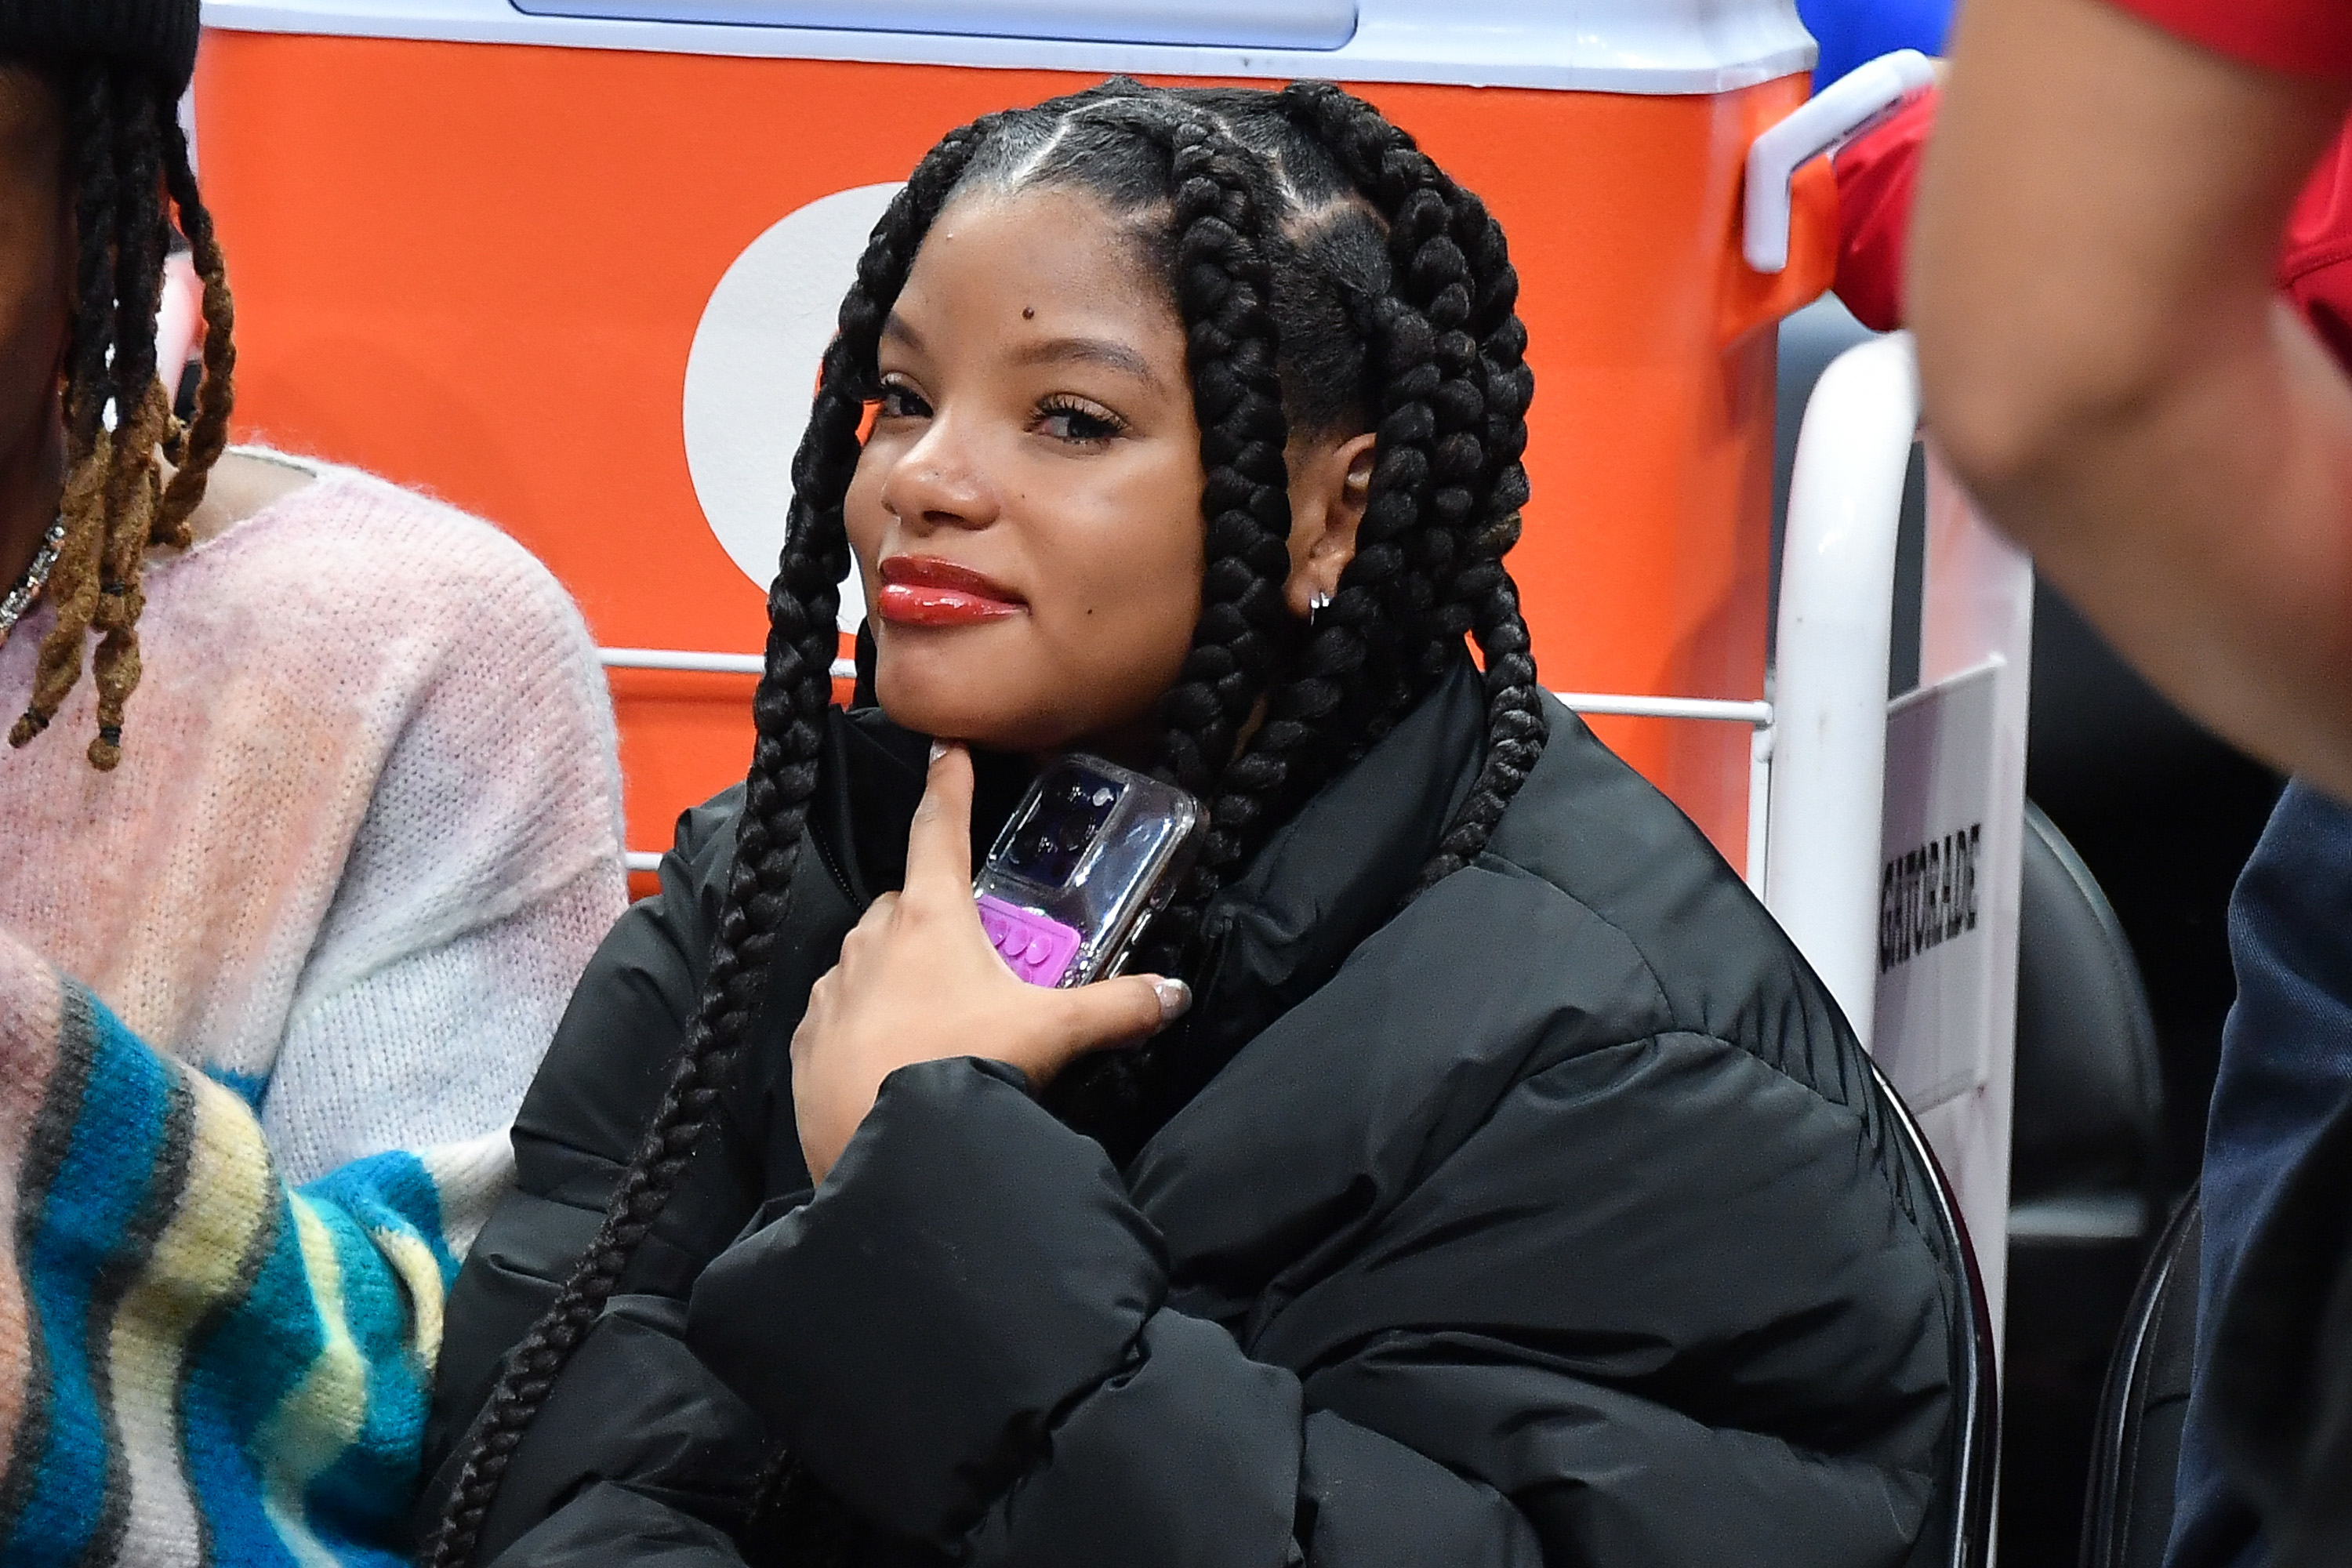 A close-up of Halle sitting, wearing a puffy jacket, and holding a cellphone